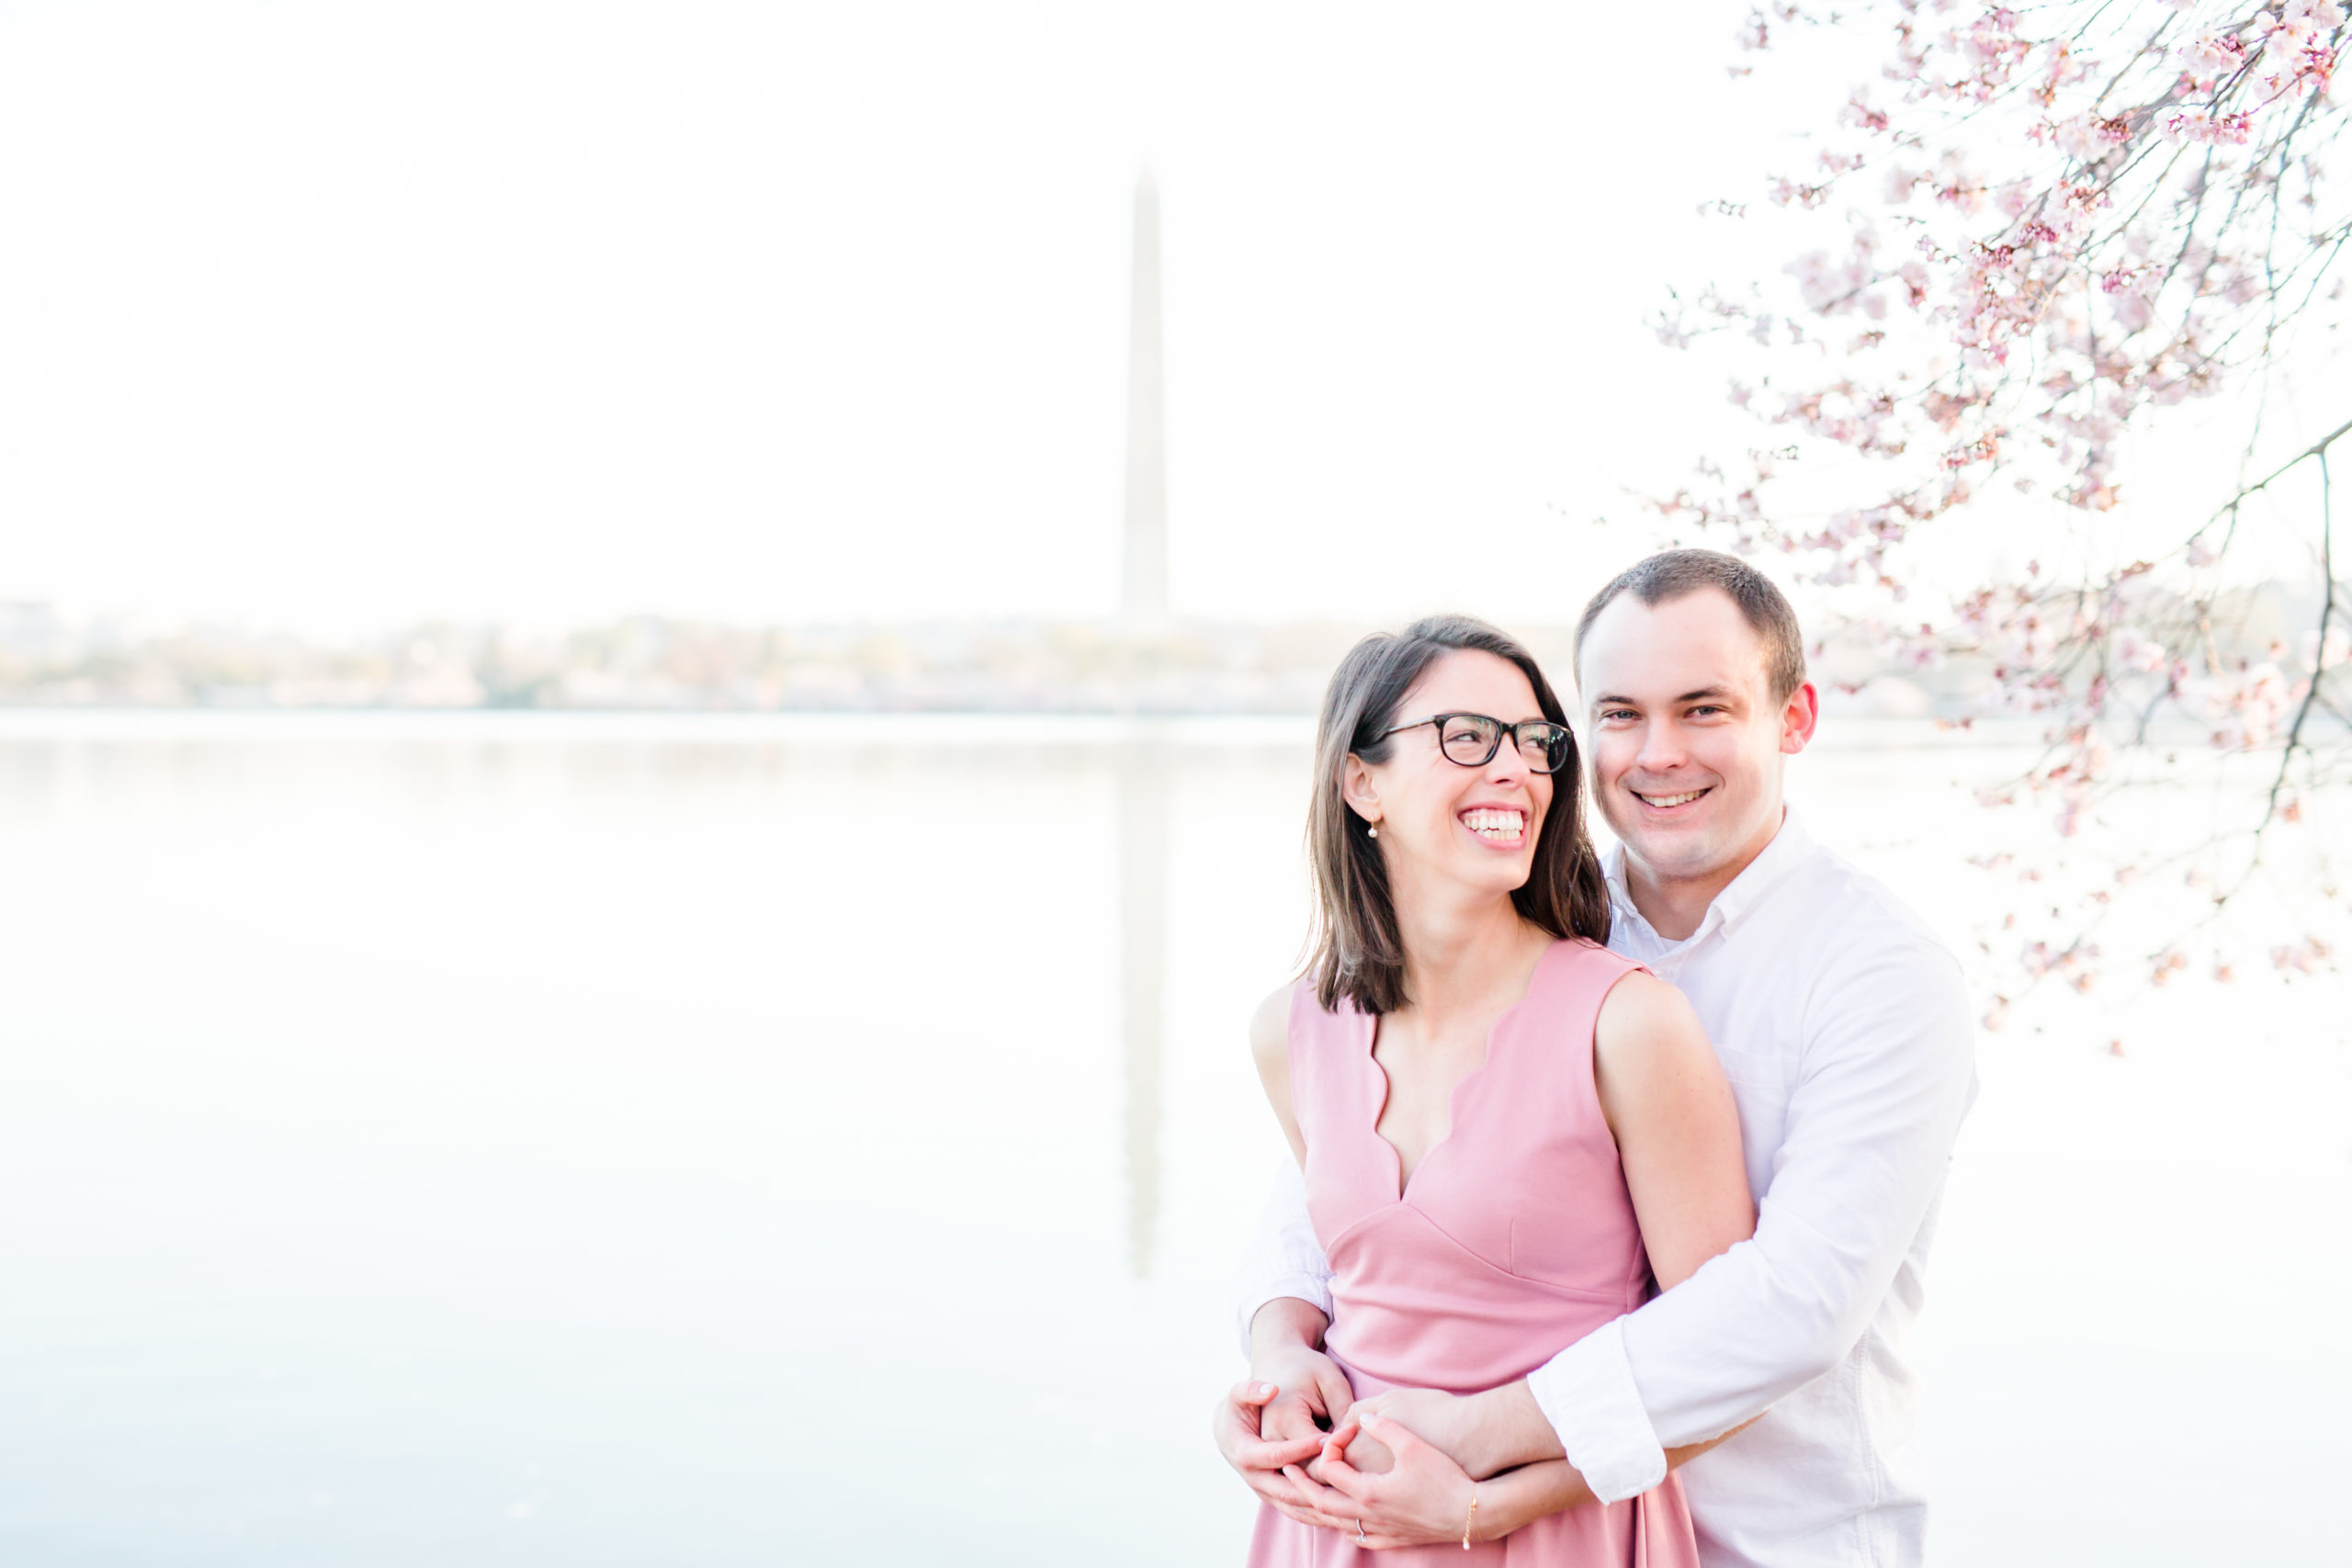 cherry blossoms photo shooot outfit ideas, D.C. cherry blossoms photographer, D.C. cherry blossoms, D.C. tidal basin, D.C. photographer, D.C. engagement photographer, D.C. wedding photographer, Rachel E.H. Photography, spring portraits, photo shoot outfits, spring outfits, family portraits, engagement session